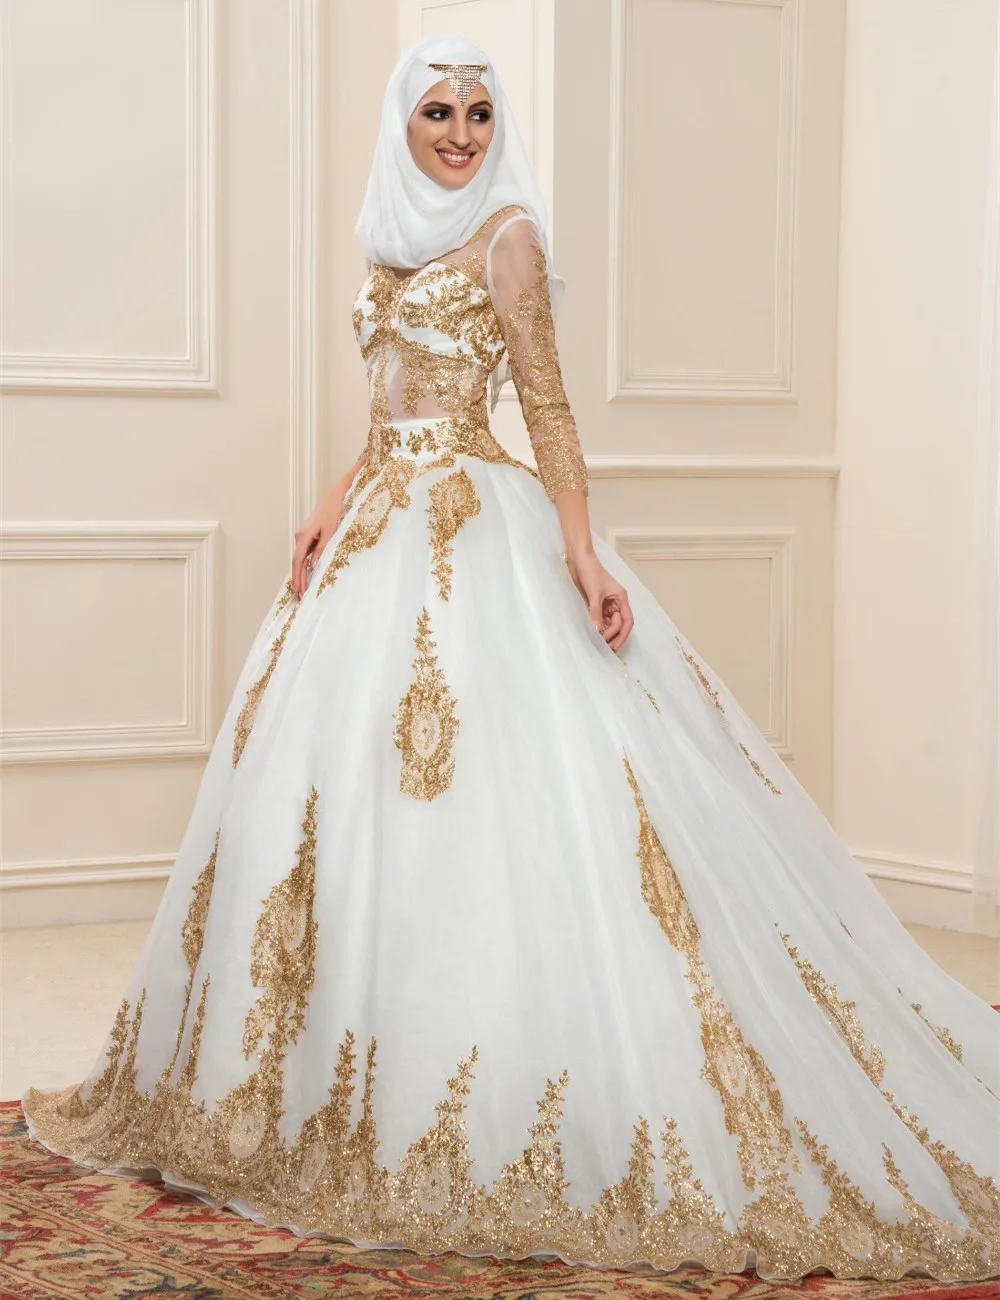 Aliexpress.com : Buy Gold Lace Muslim Wedding Dresses With Sleeves 2016